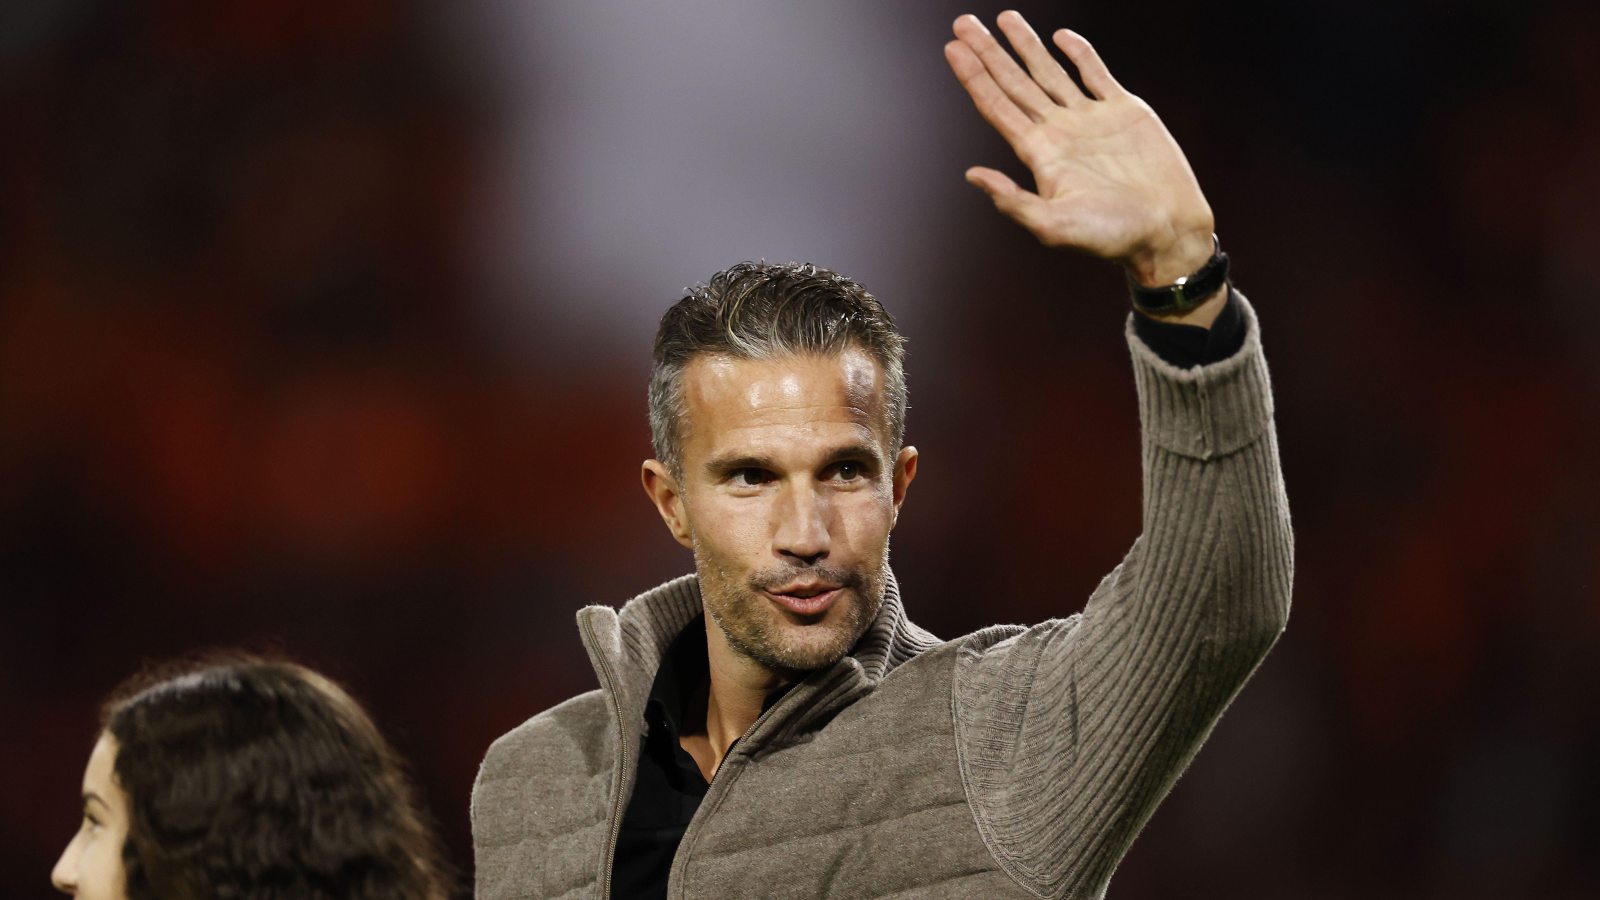 Van Persie praises the Manchester United star after Barcelona’s victory